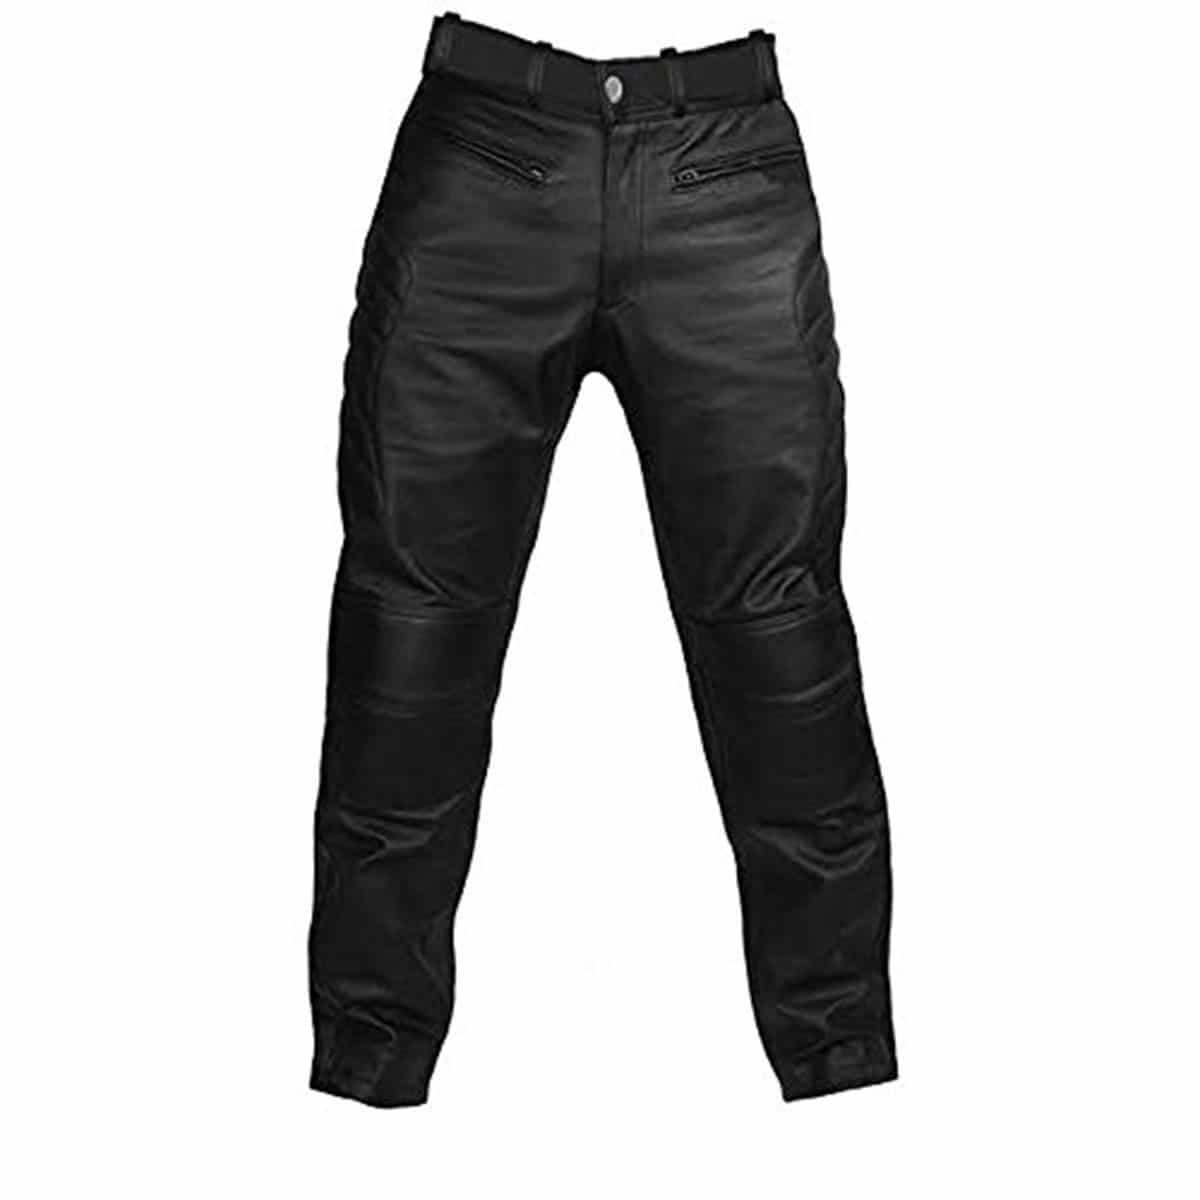 MENS MOTORCYCLE BIKERS STYLE BLACK LEATHER PANTS JEANS TROUSERS - JEANS3